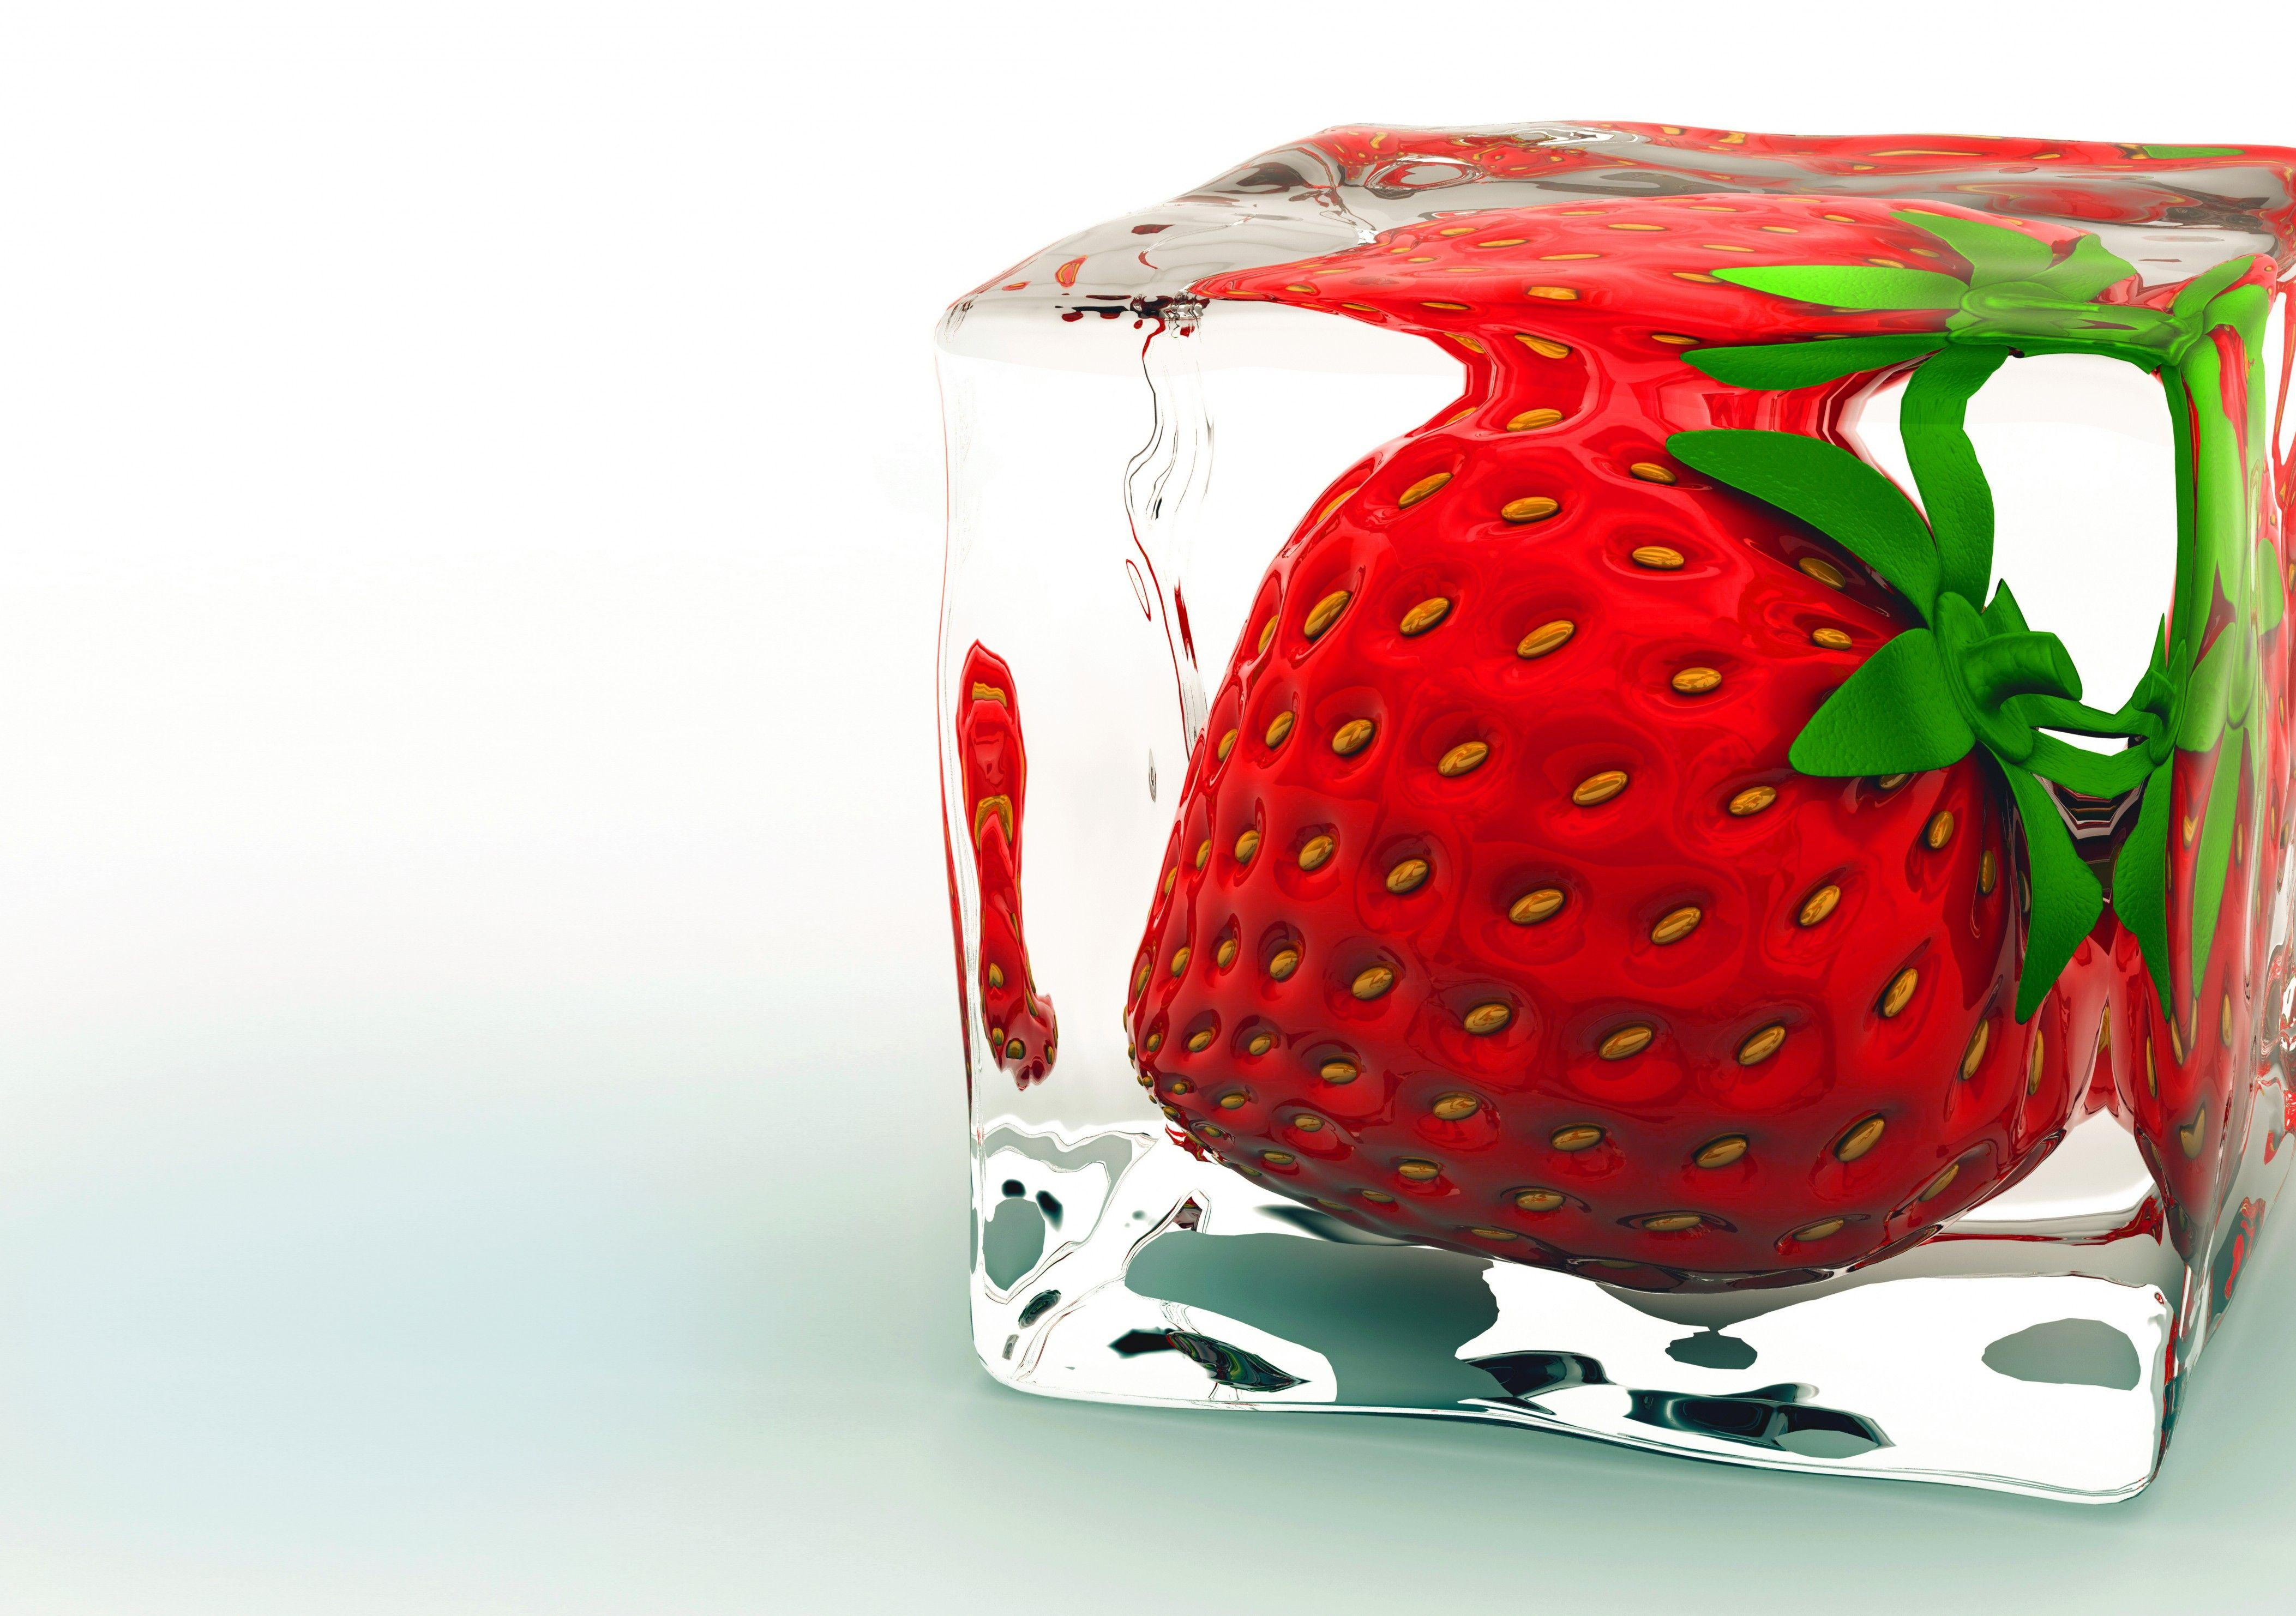 Download 4210x2964 Strawberry, Ice Cube, Fruit Wallpaper